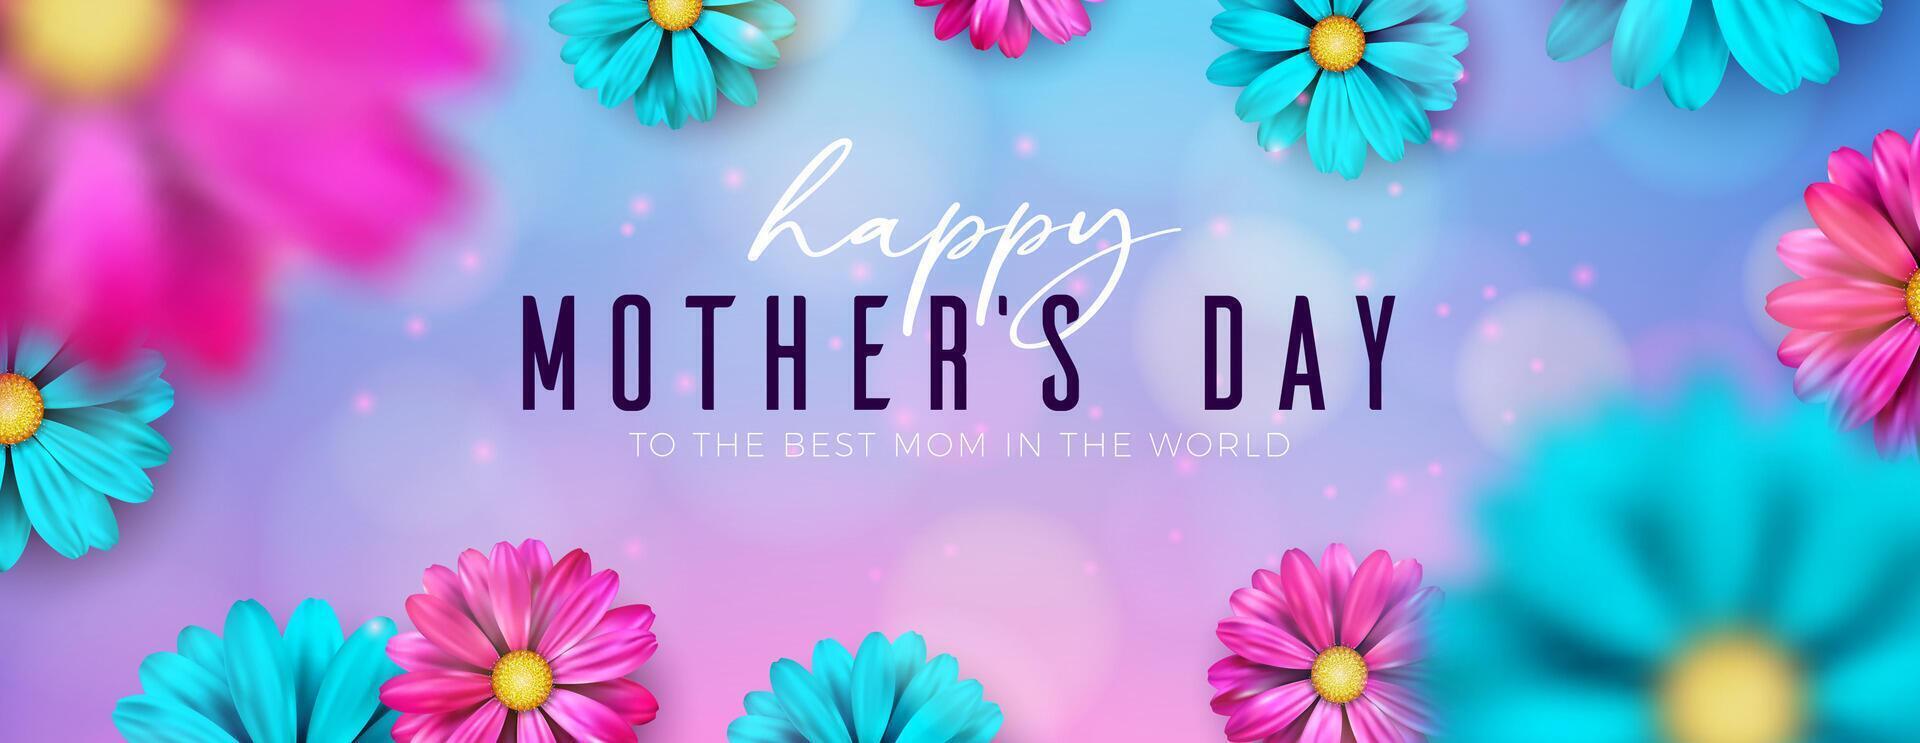 Happy Mother's Day Banner with Spring Flower and Typography Lettering on Blue Background. Vector International Mom Celebration Design with Symbol of Love for Postcard, Greeting Card, Flyer, Invitation